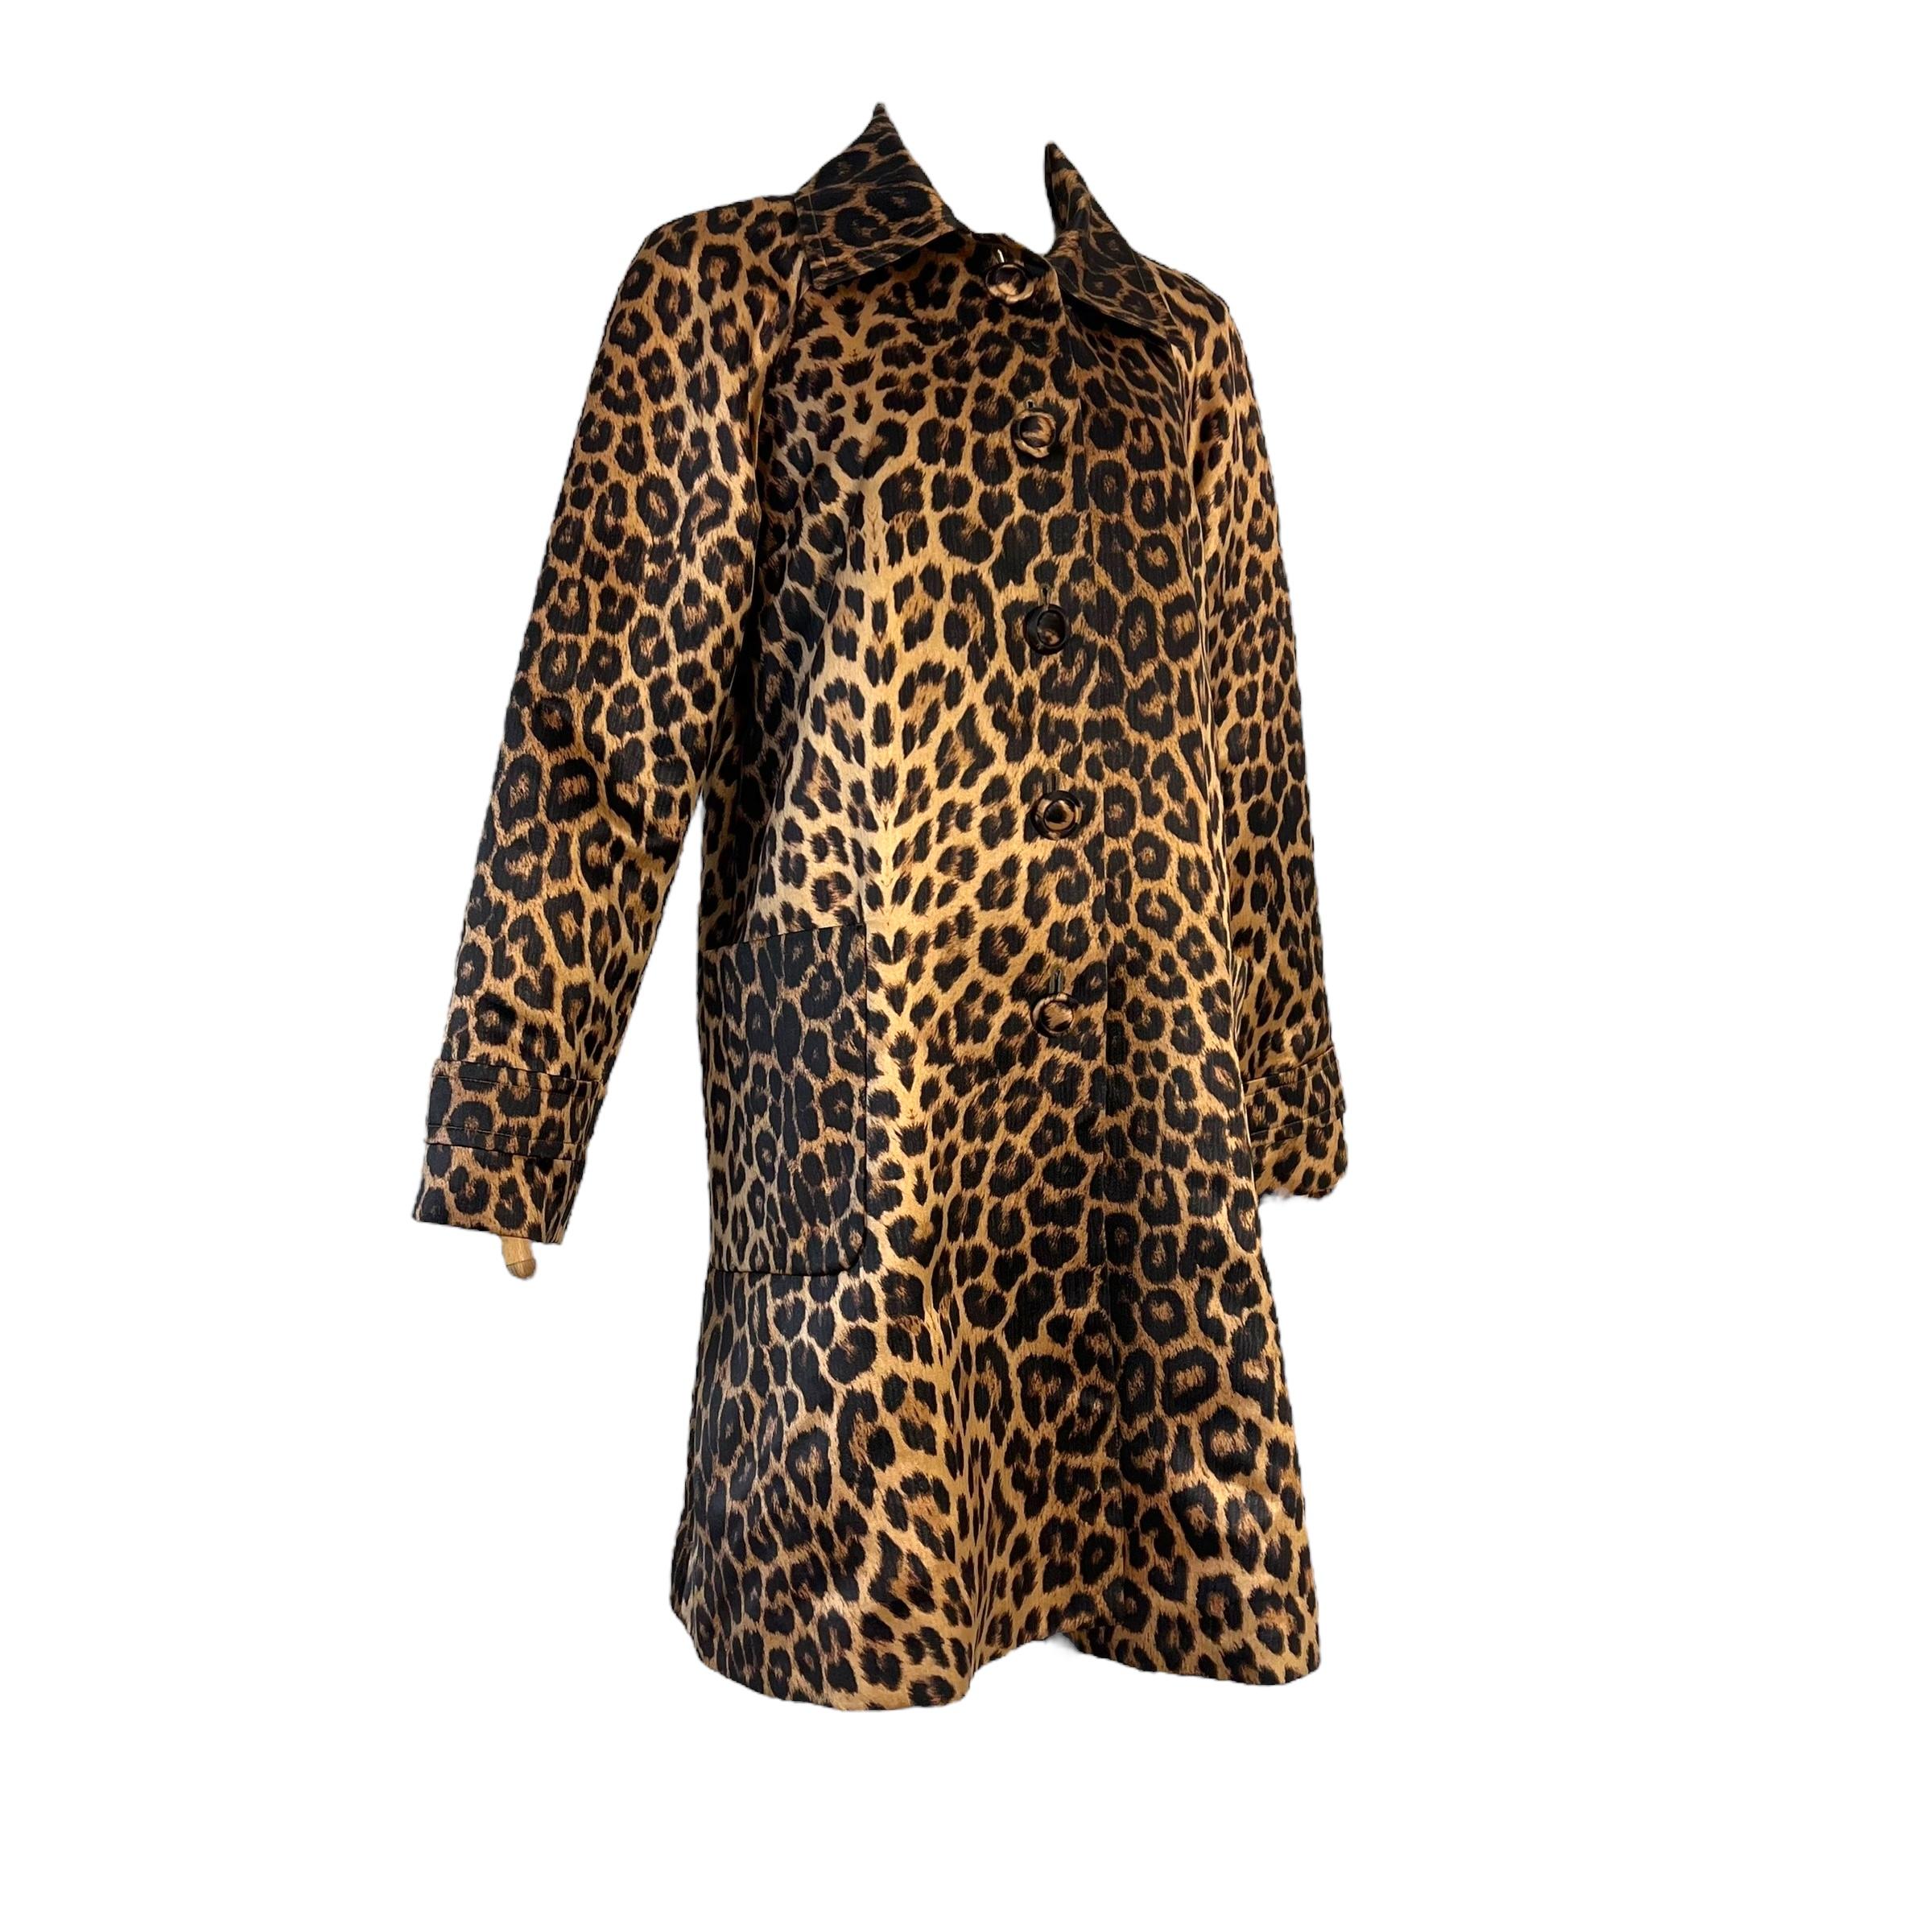 Vintage Yves Saint Laurent 90's leopard coat. Designed by a fashion icon, this vintage coat features a striking gold leopard print with a smooth lining. In good vintage condition, this 100% polyester coat is perfect for any special occasion. Made in